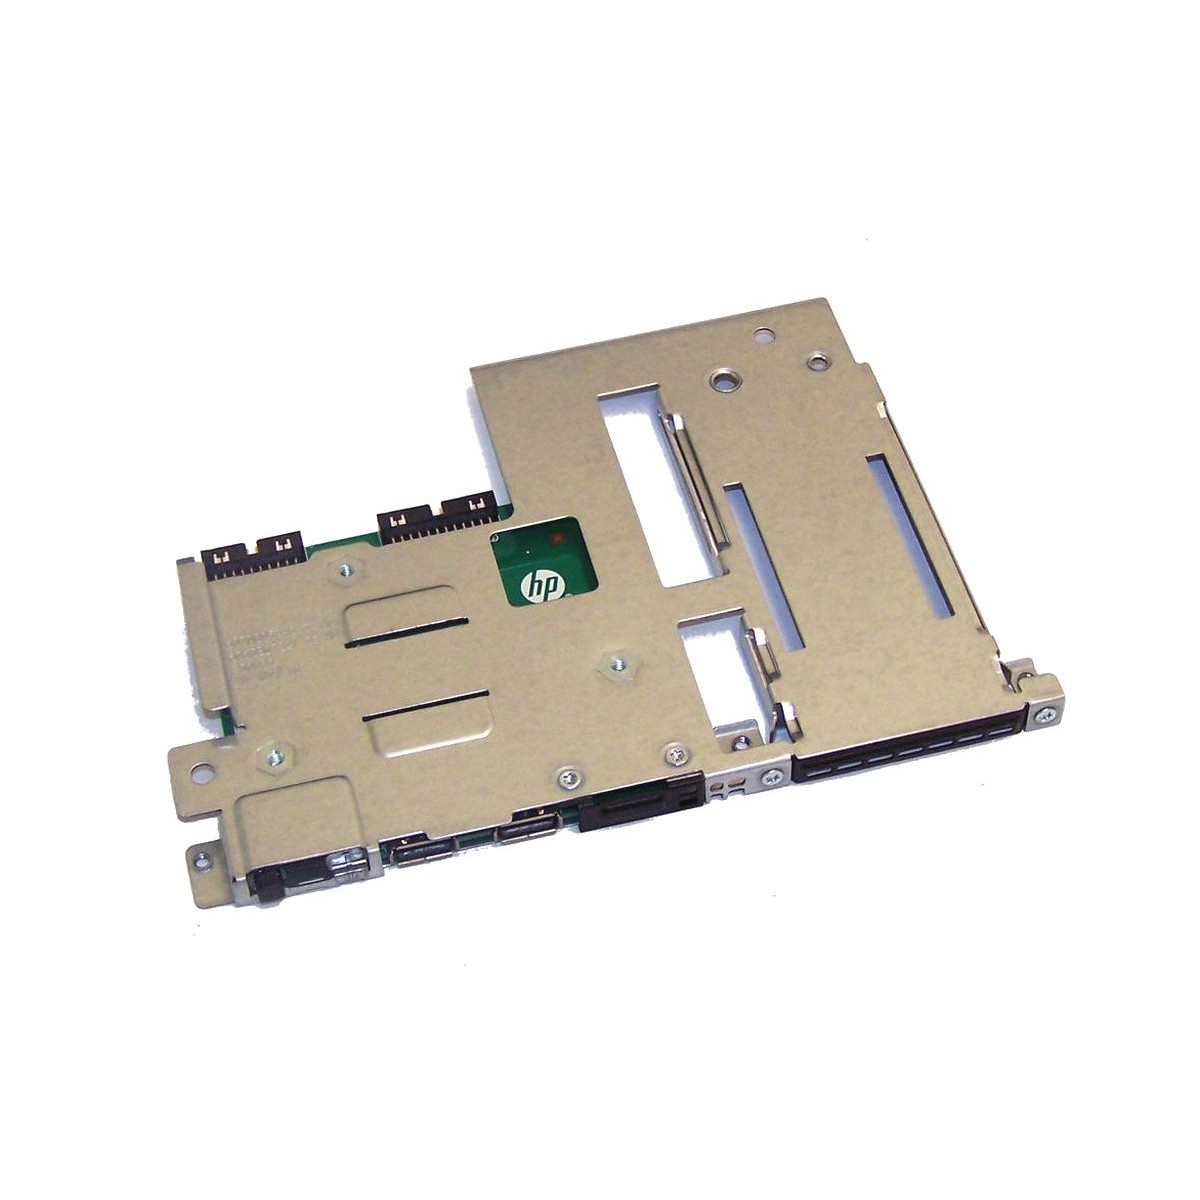 FRONT CONTROL PANEL HP DL320e G8